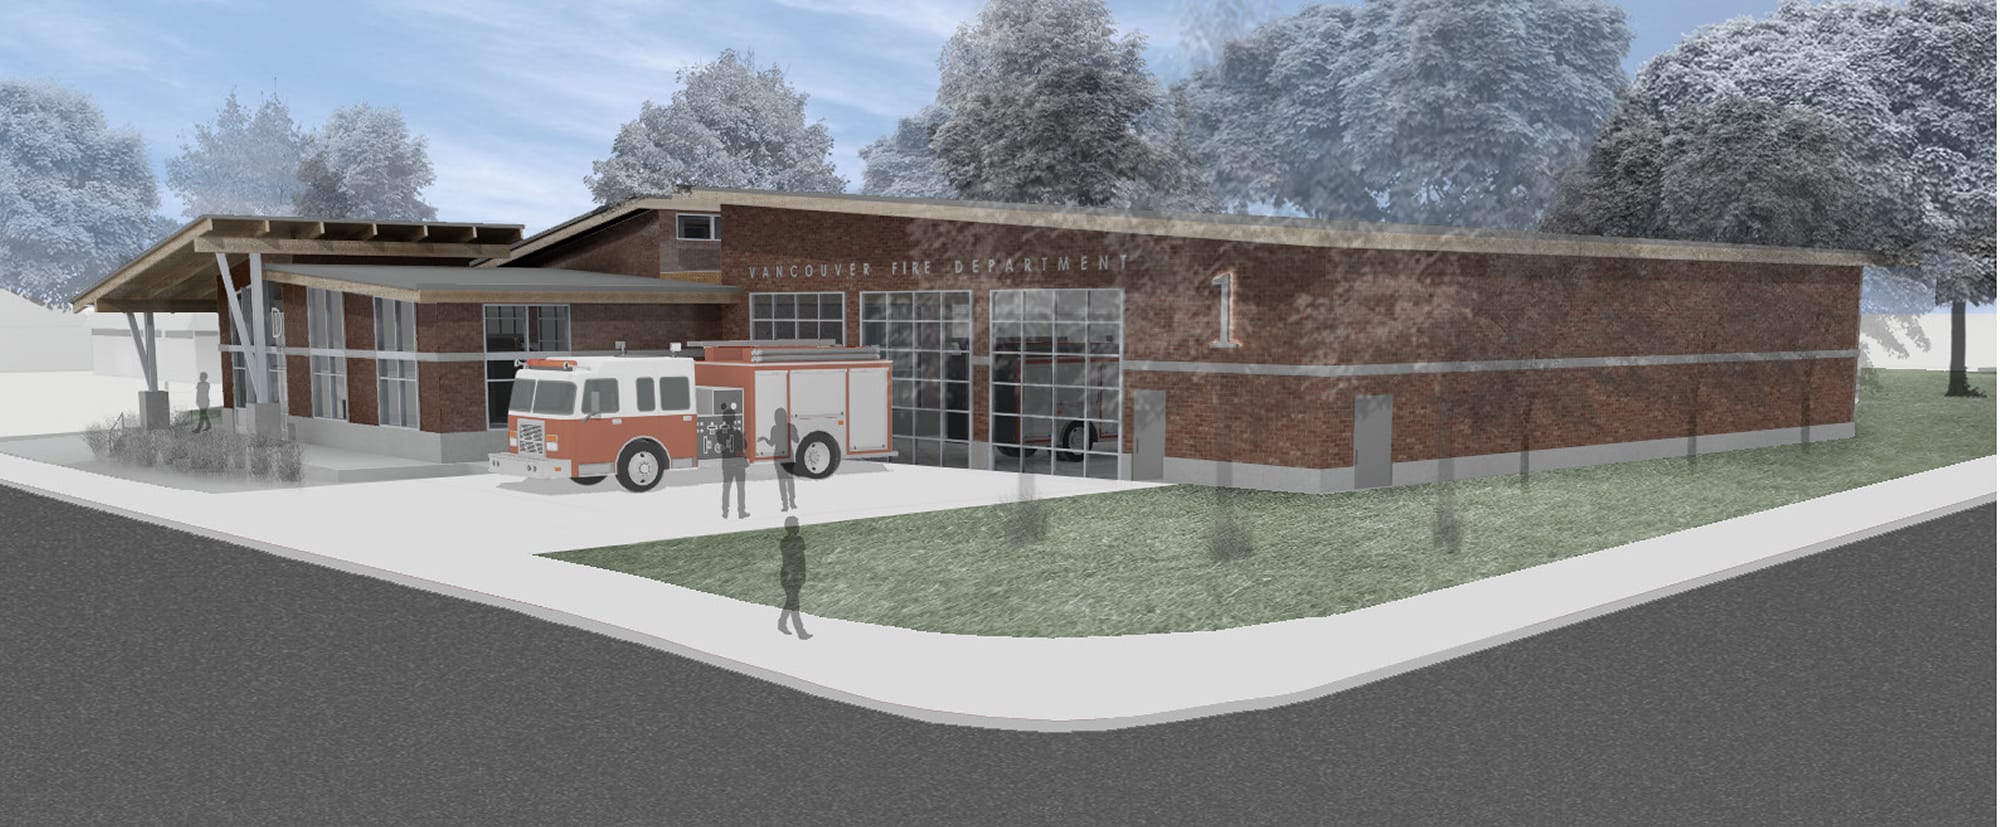 Artist's rendering of the apparatus bay at the new fire station planned for Uptown Village at Northeast Fourth Plain Boulevard and Main Street in Vancouver.